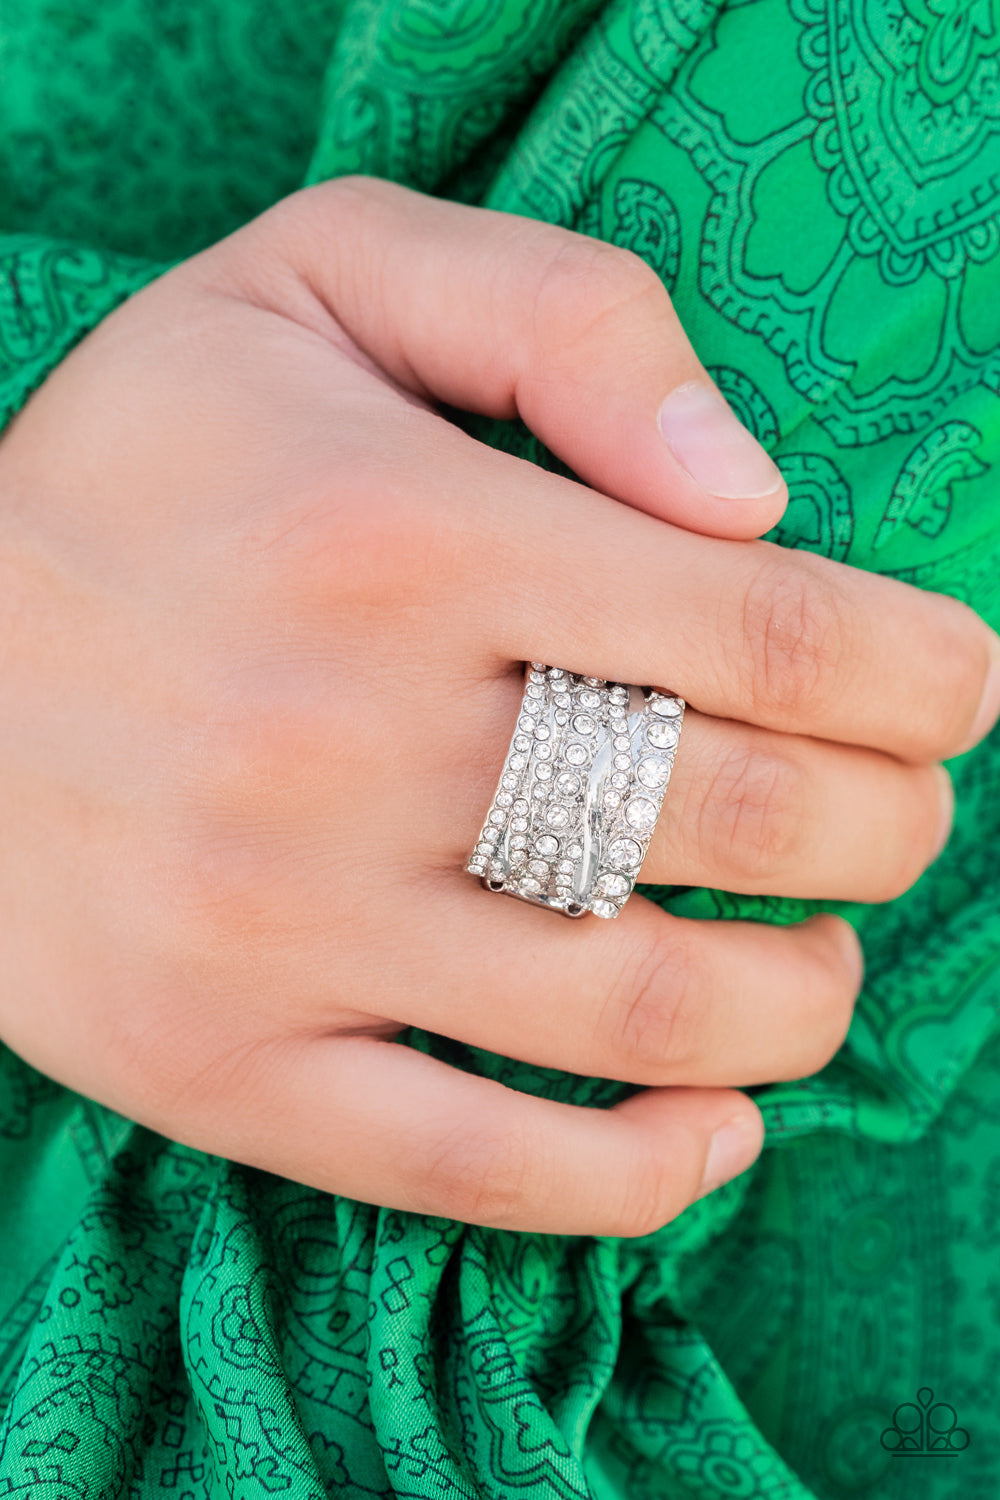 Exclusive Elegance White Ring - October 2021 Life of the Party Exclusive - Princess Glam Shop